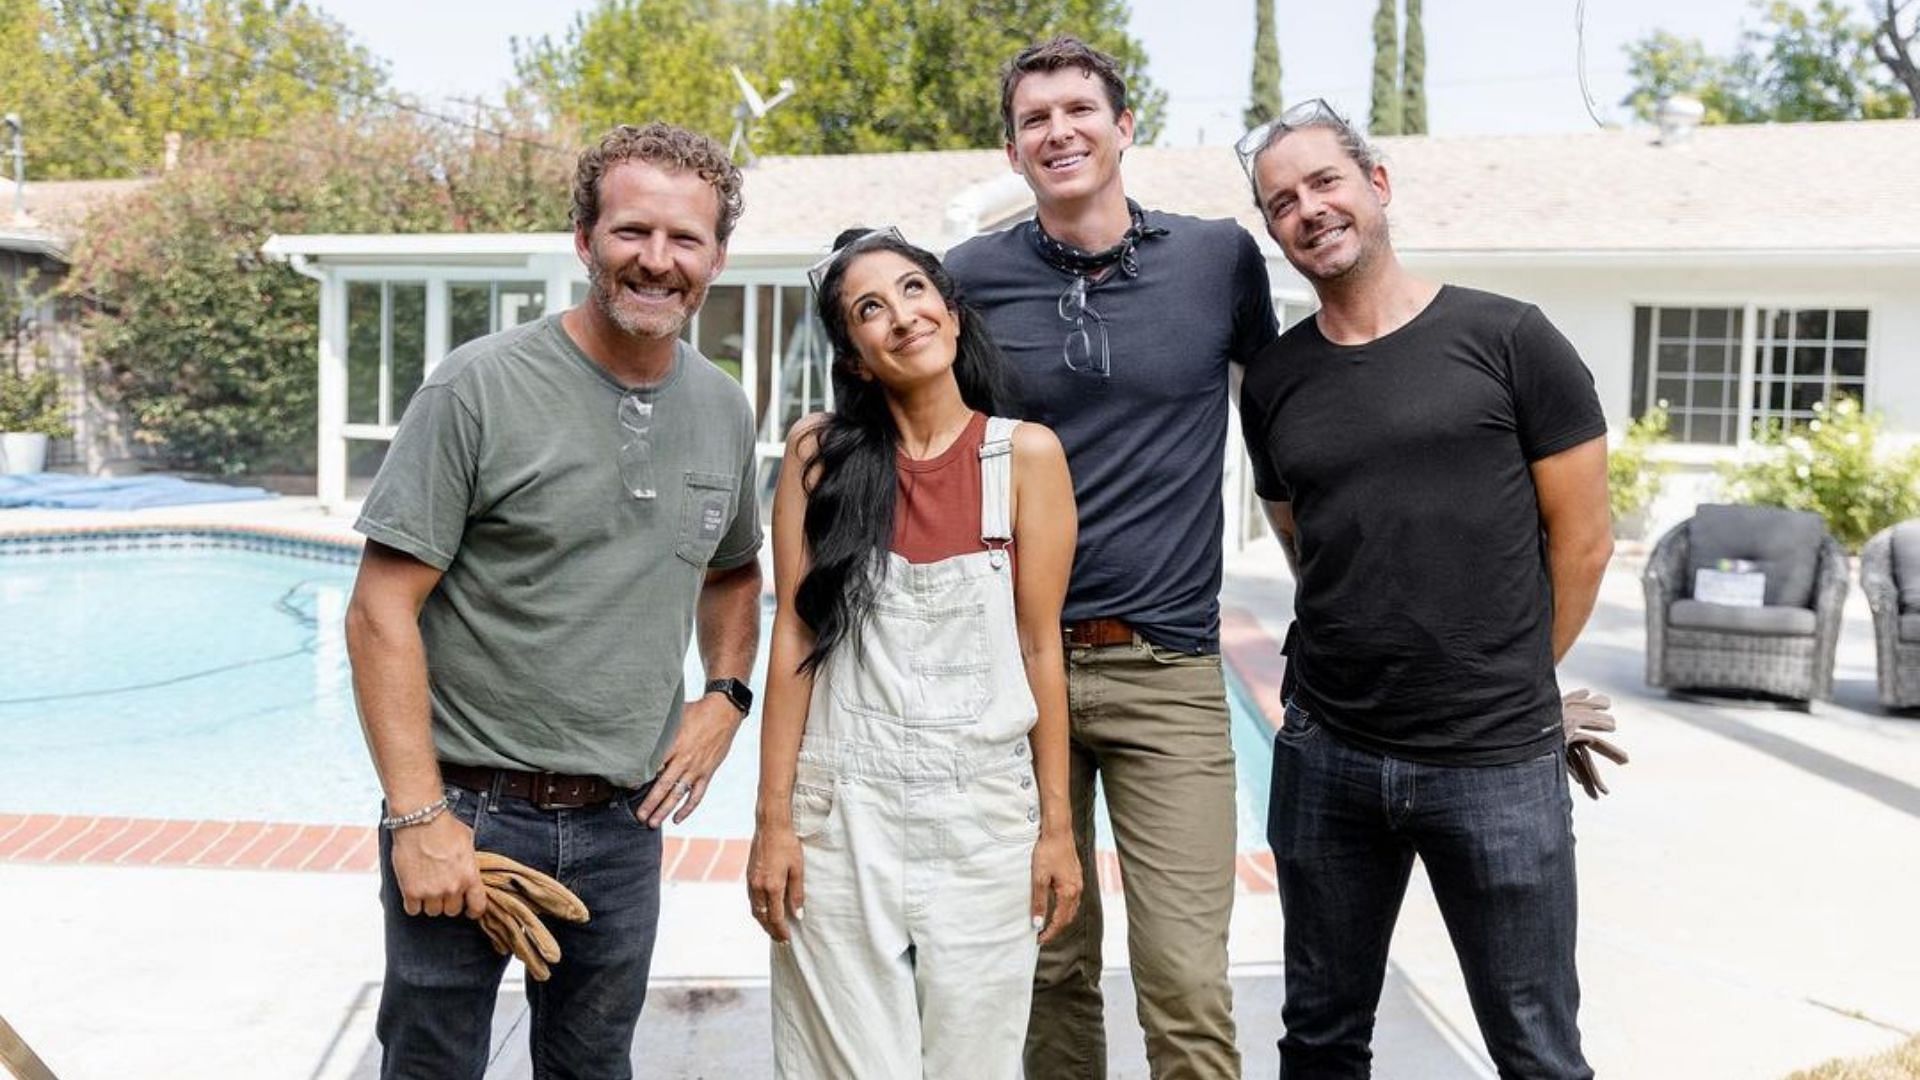 Revealed is a new home renovation show on HGTV